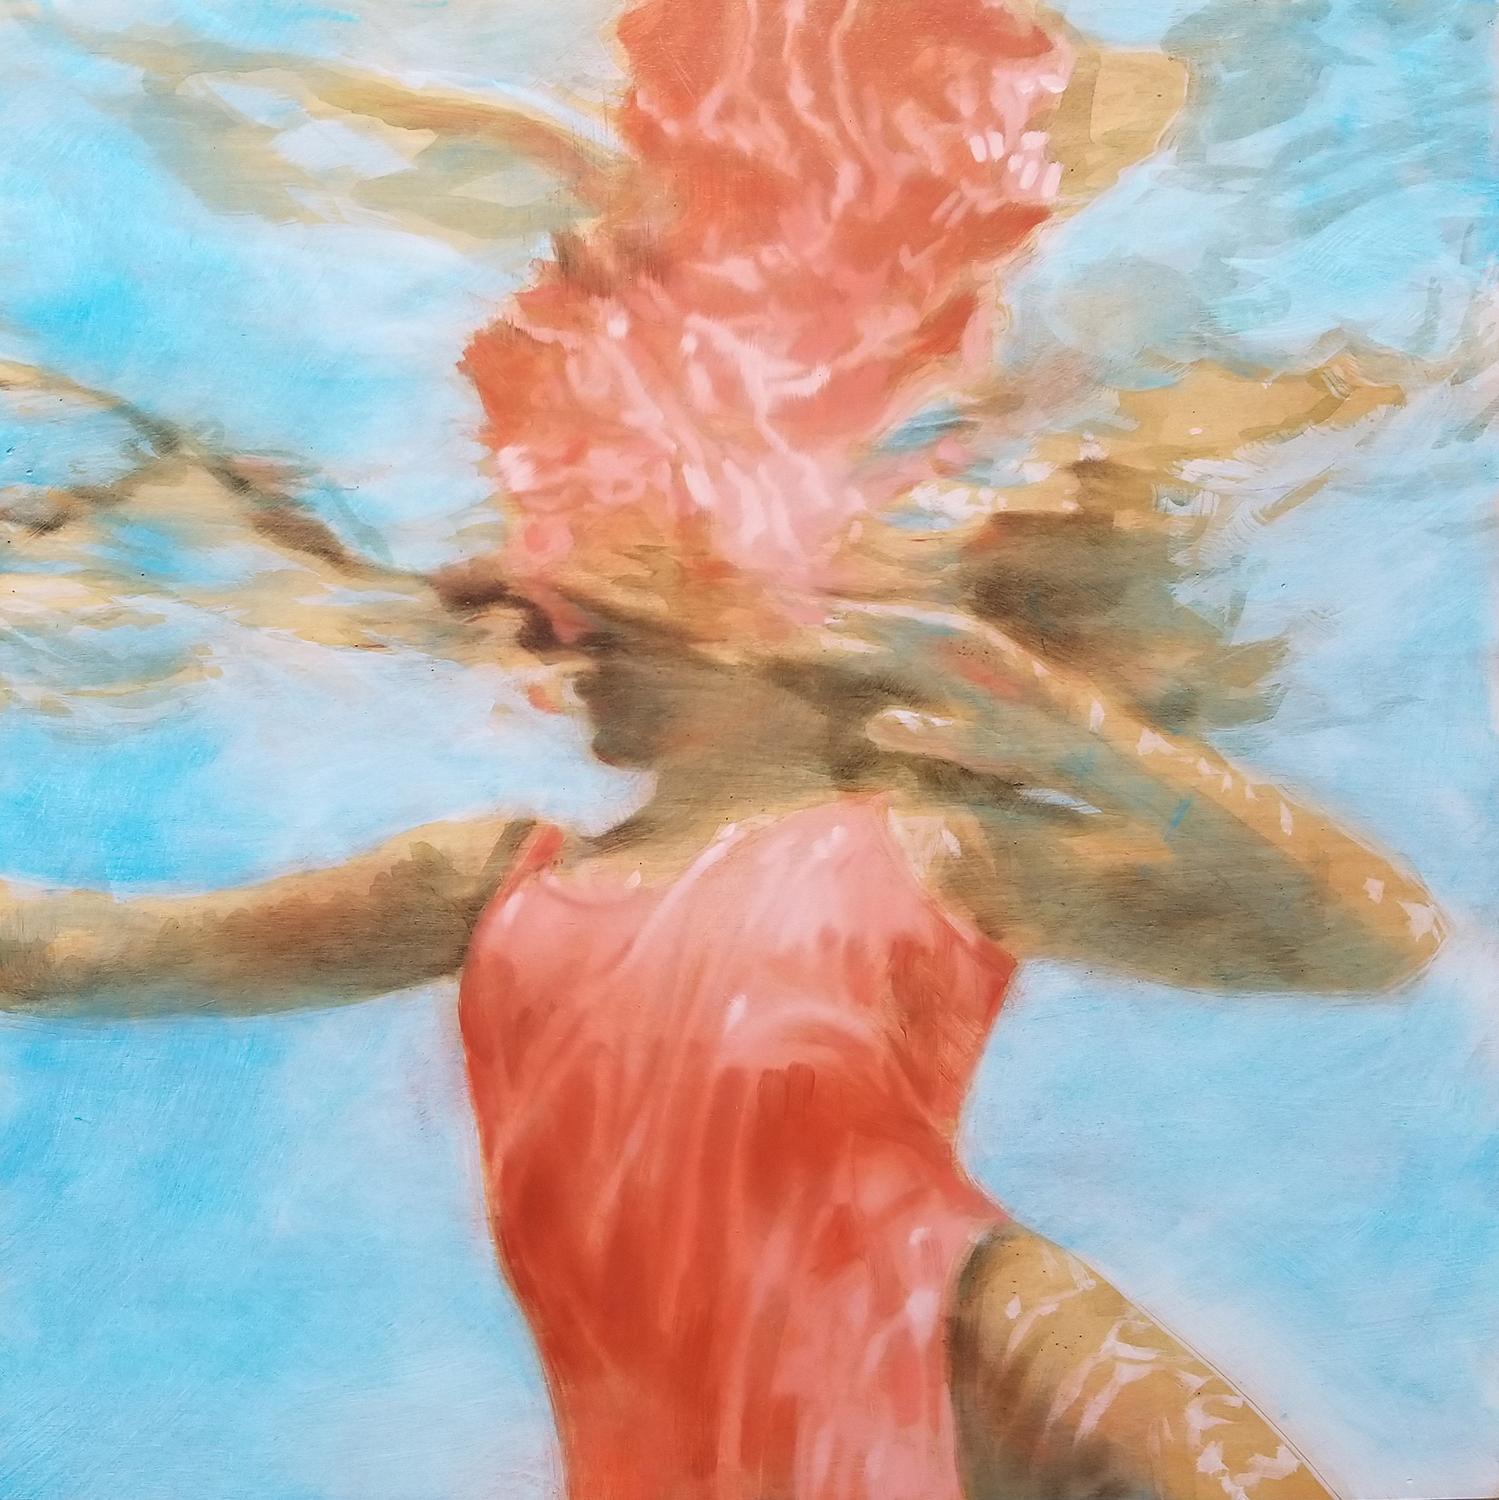 Carol Bennett Figurative Painting - "Rose Cartemus" oil painting of a woman in a red swimsuit in a blue pool